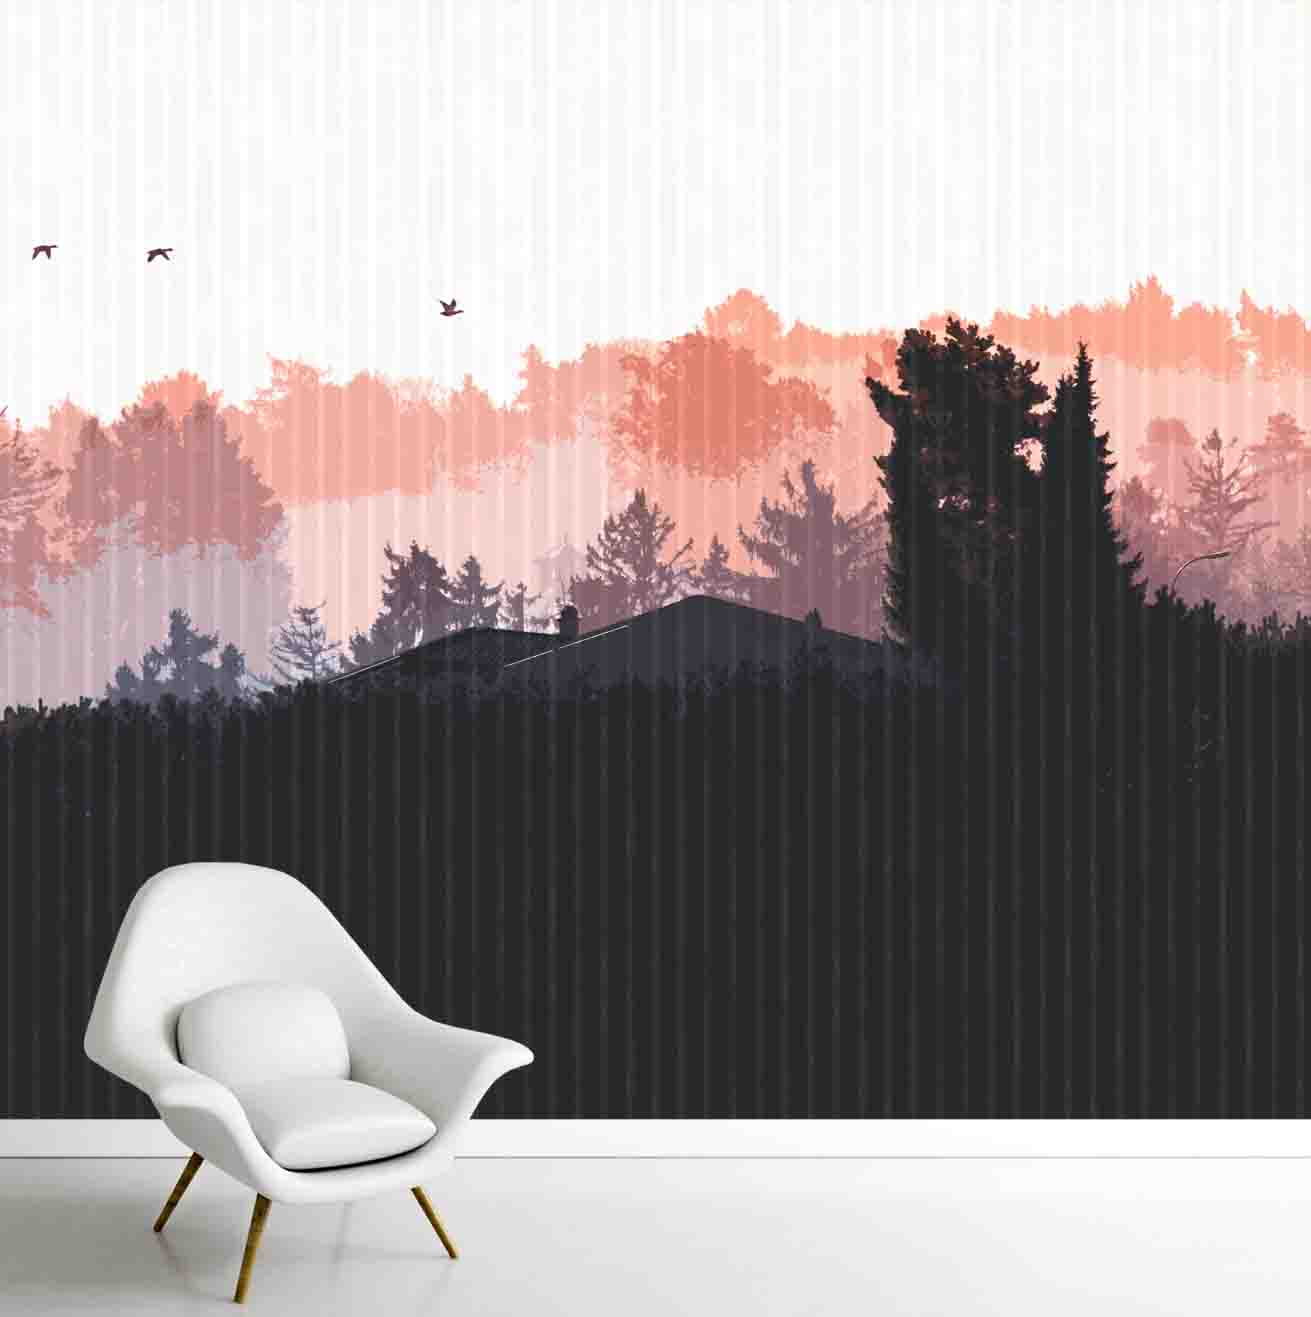 Customised lifencolors Mural, Silhouette Based Life n Wall – | Art Colors